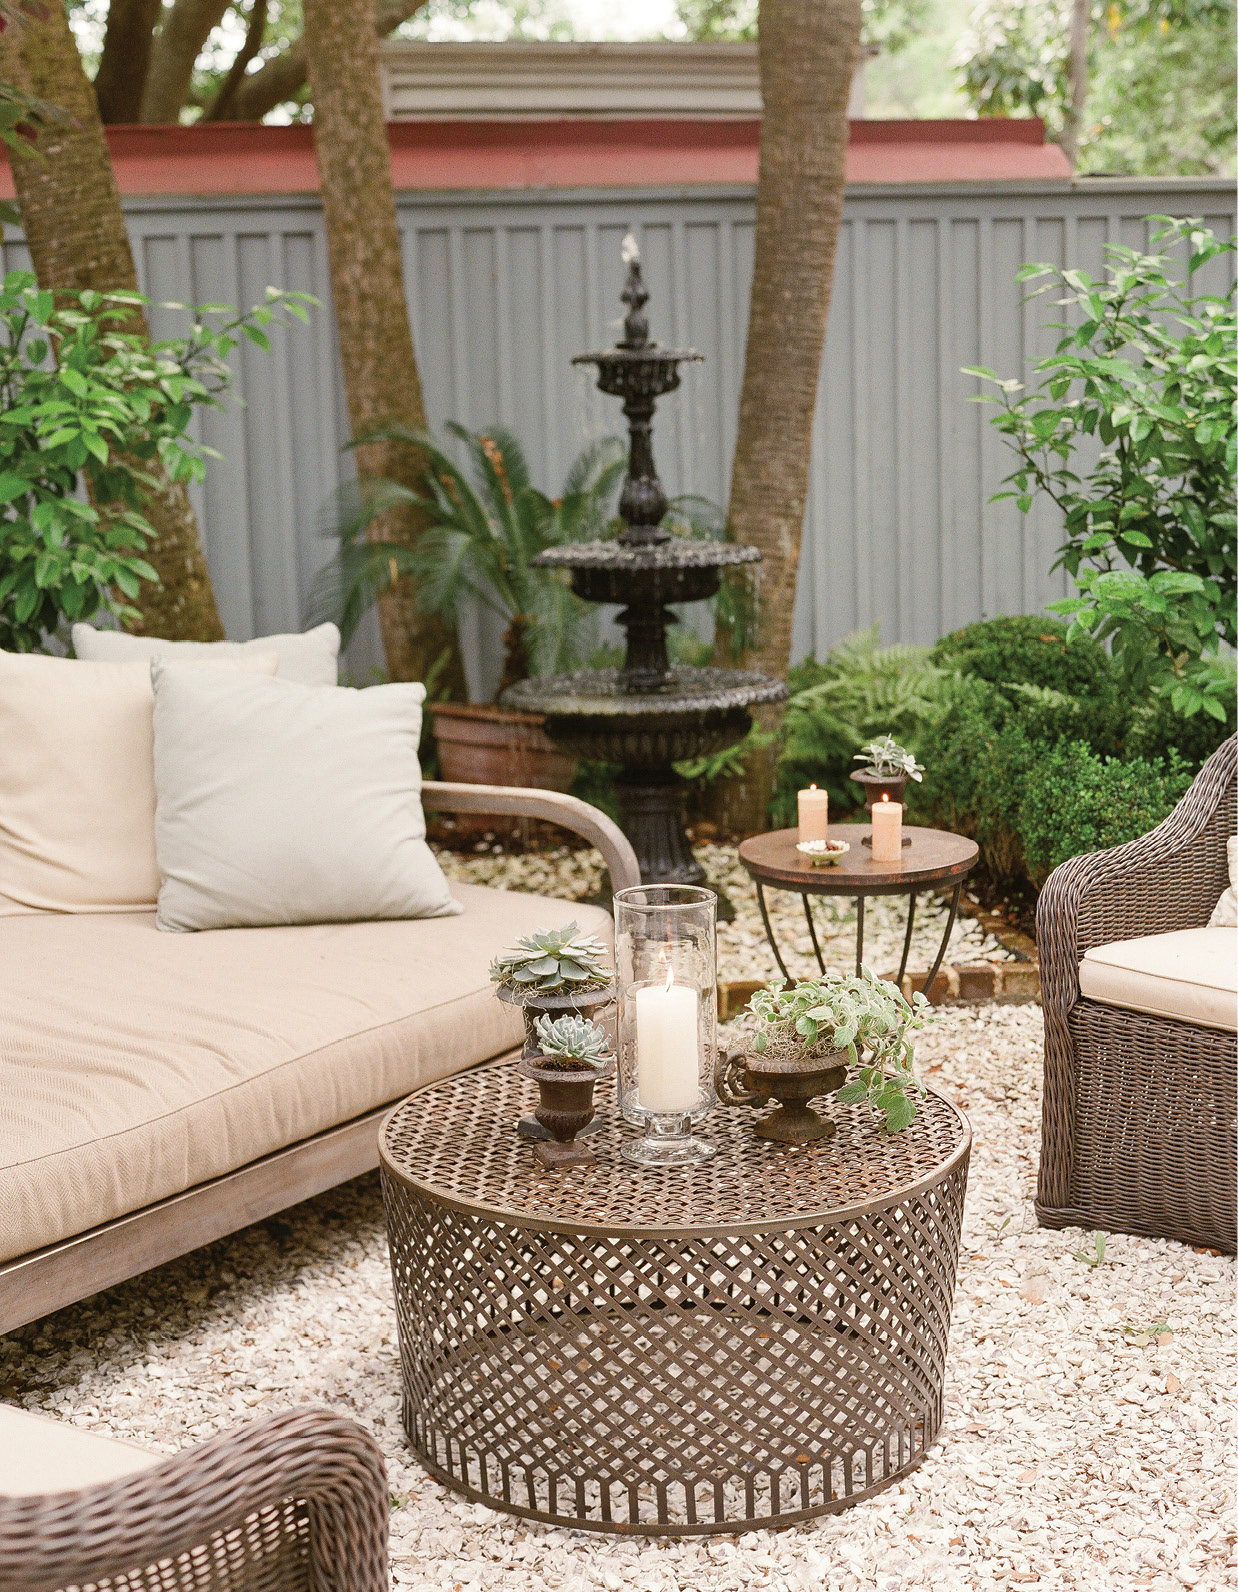 To turn a garden alcove into an inviting cocktail nook, Lynn arranged outdoor furniture and added candles and potted plants to enhance an oyster tabby patio.